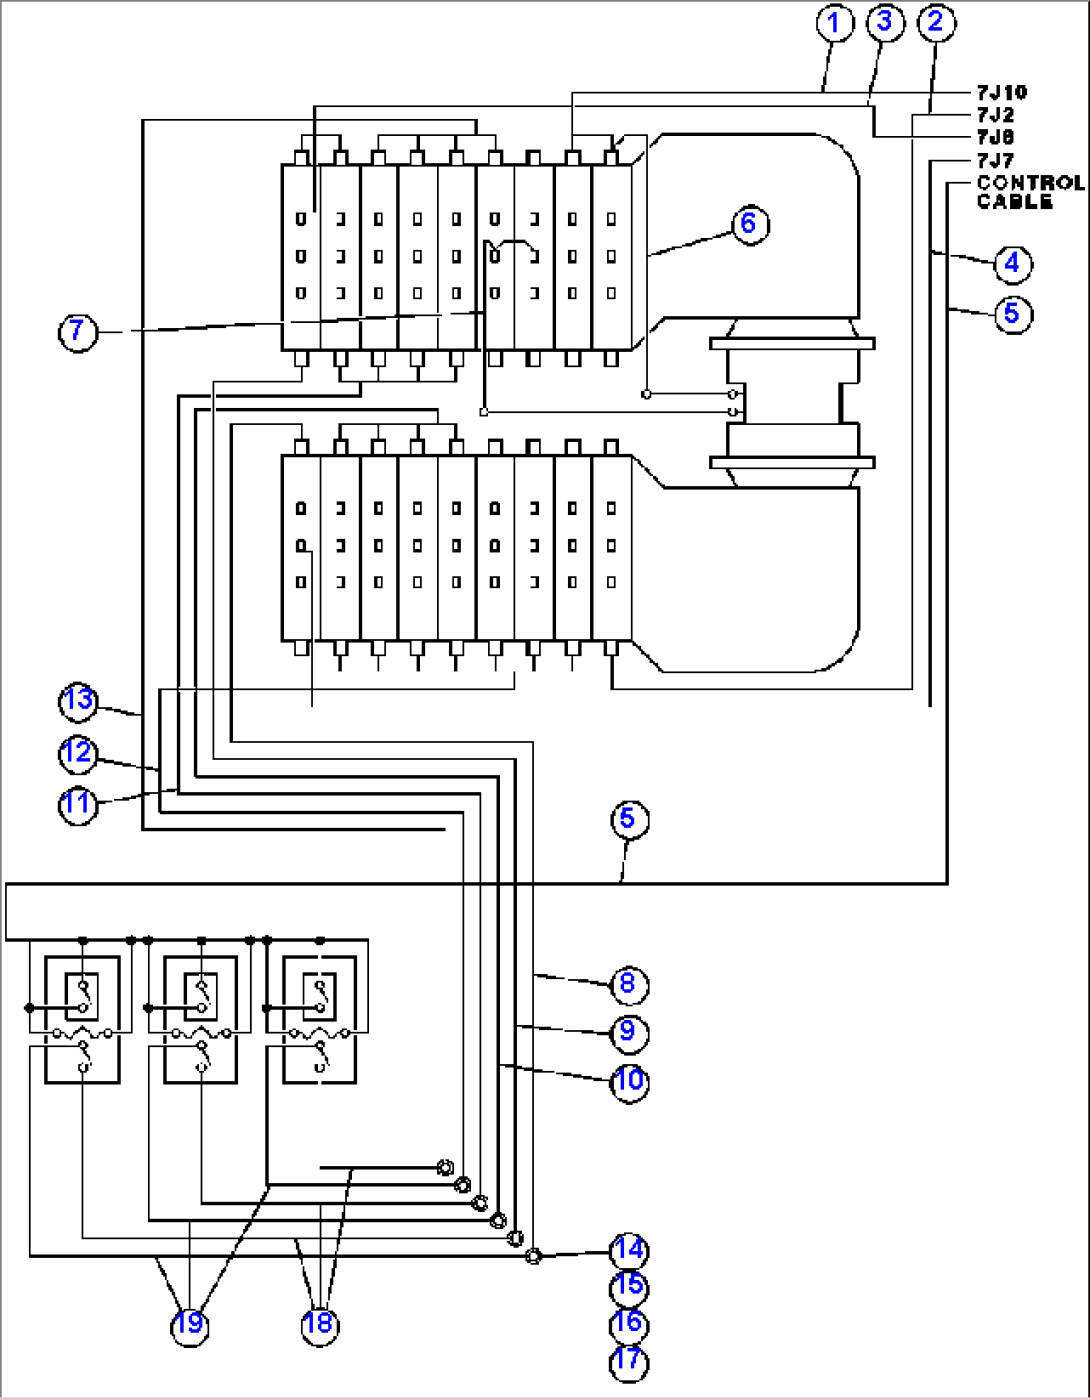 ELECTRIC POWER COMPONENTS WIRING - 2